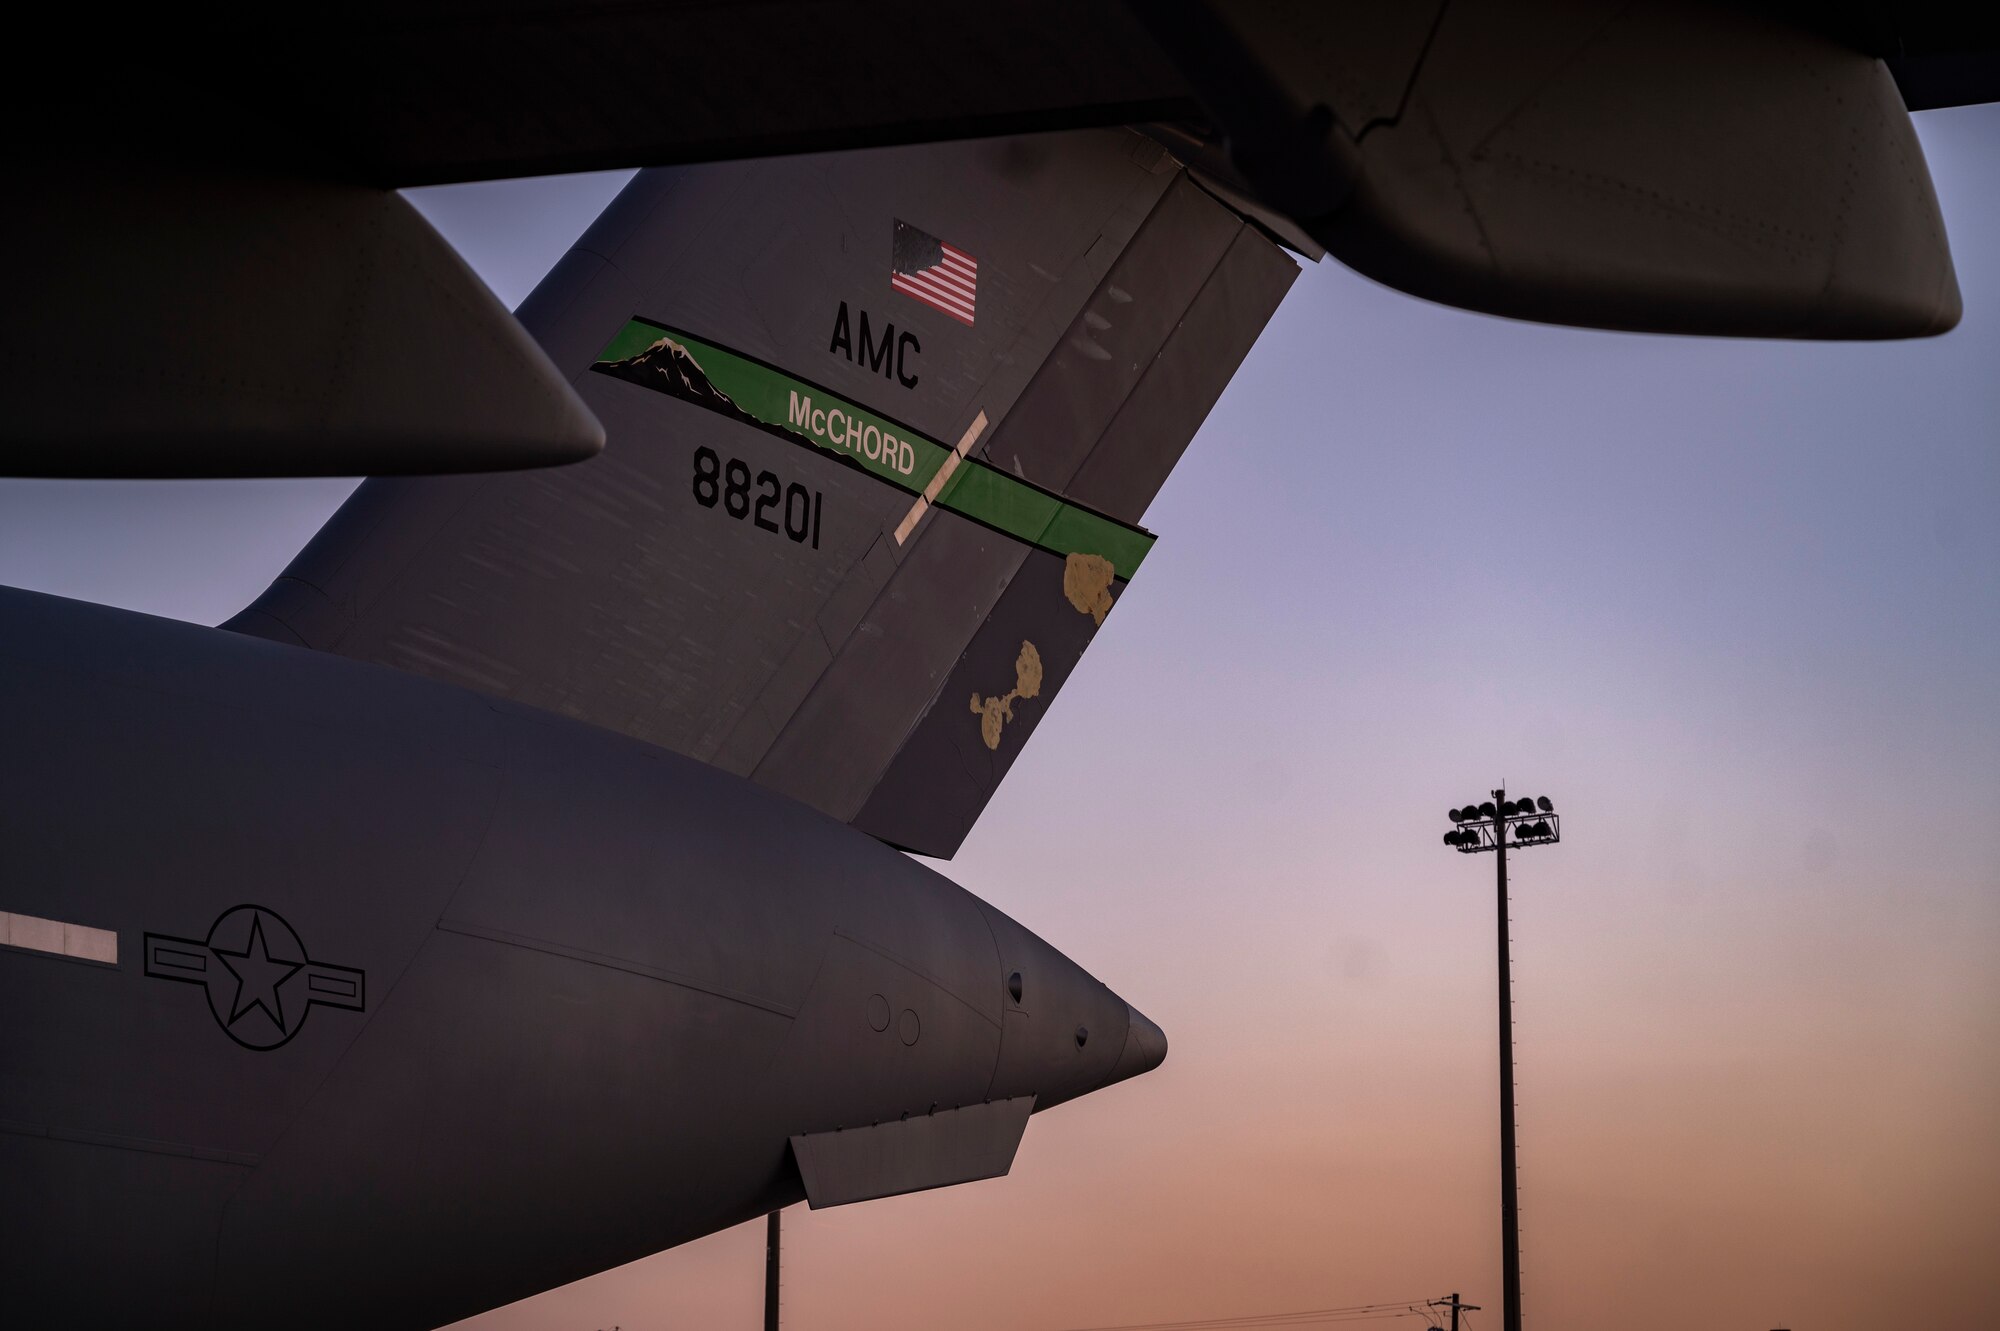 A C-17 Globemaster III assigned to Joint Base Lewis-McChord, Washington, prepares to takeoff at Pope Army Airfield, North Carolina, Feb. 1, 2022. Battalion Mass Tactical Week, or BMTW, is a week-long exercise between the U.S. Air Force and U.S. Army to enhance members’ abilities by practicing scenarios in a controlled environment. (U.S. Air Force photo by Airman 1st class Charles Casner)